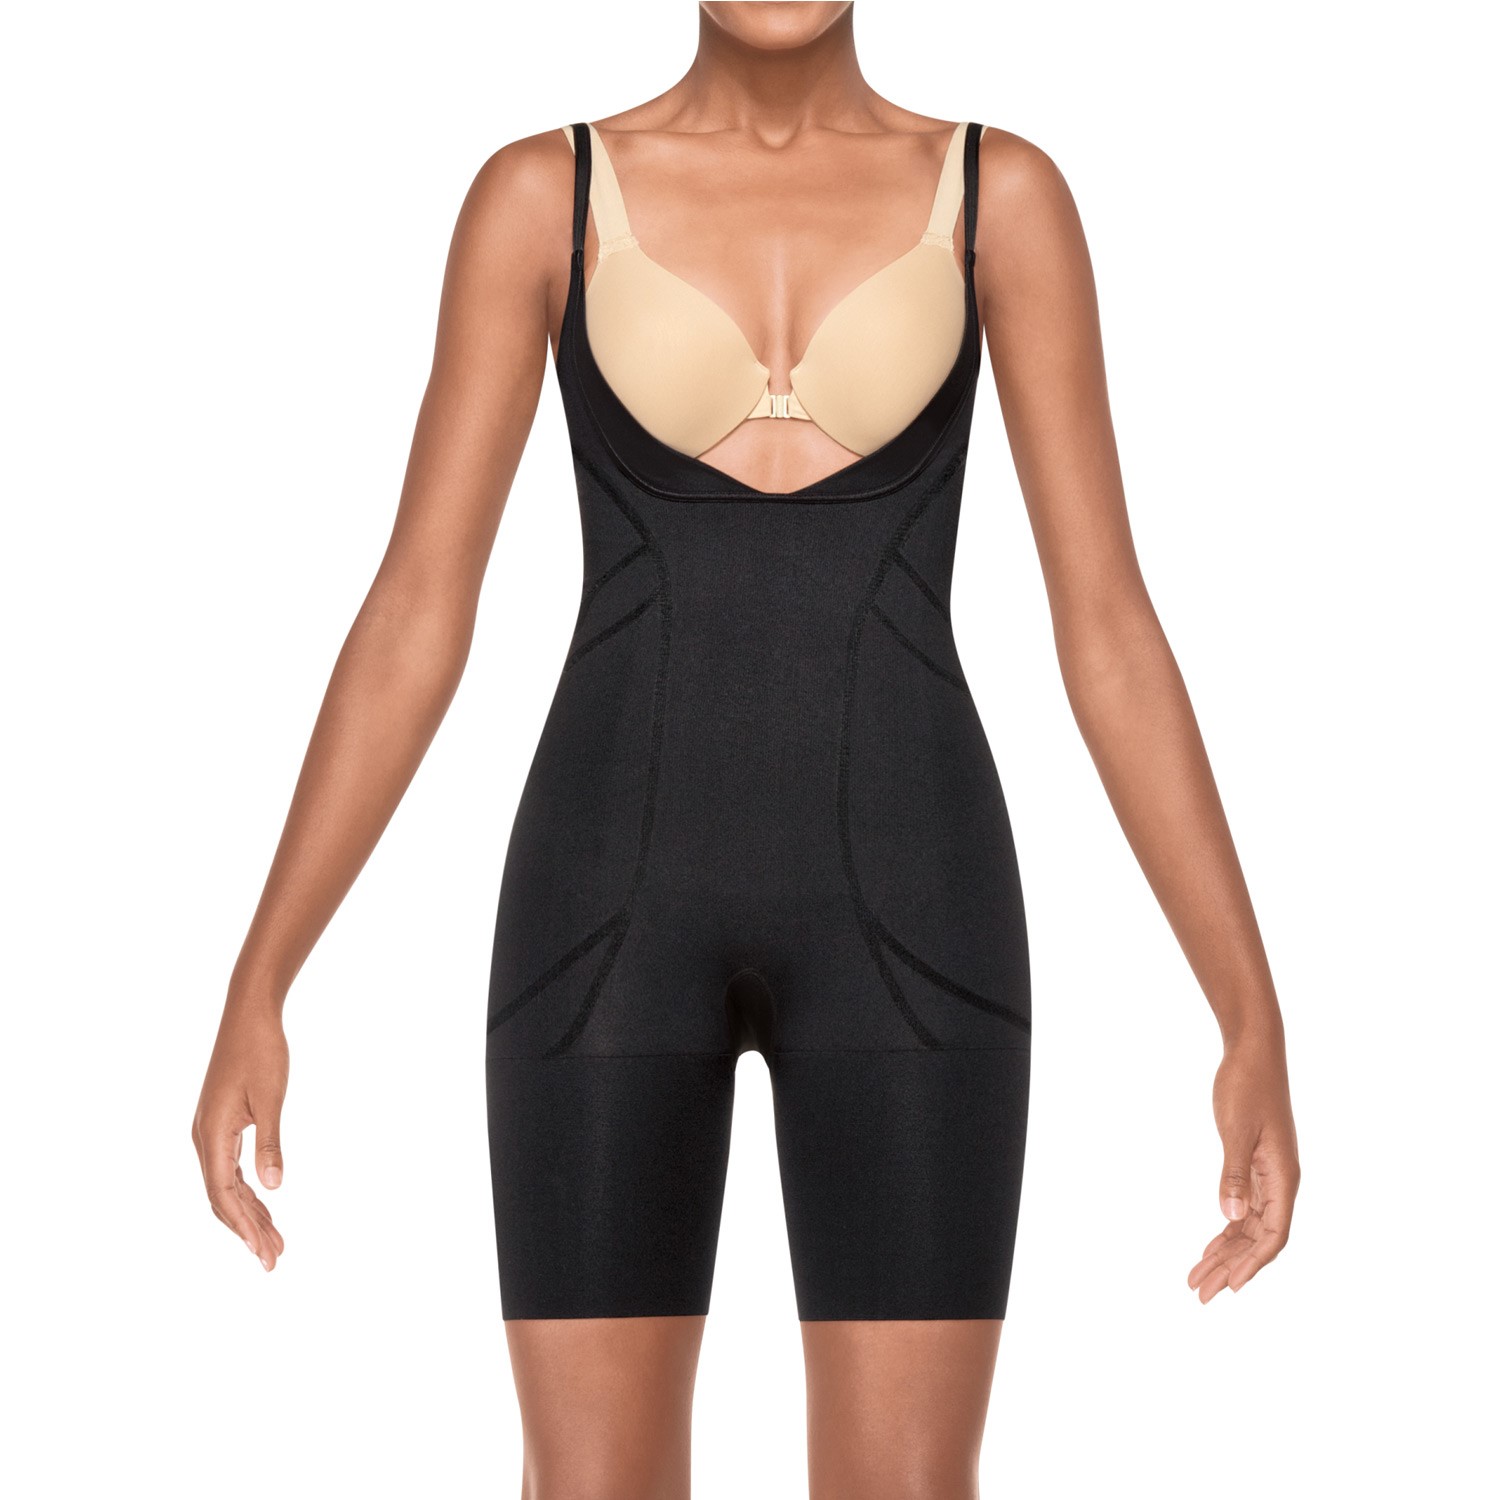 Spanx Slimmer and Shine Open Bust Body